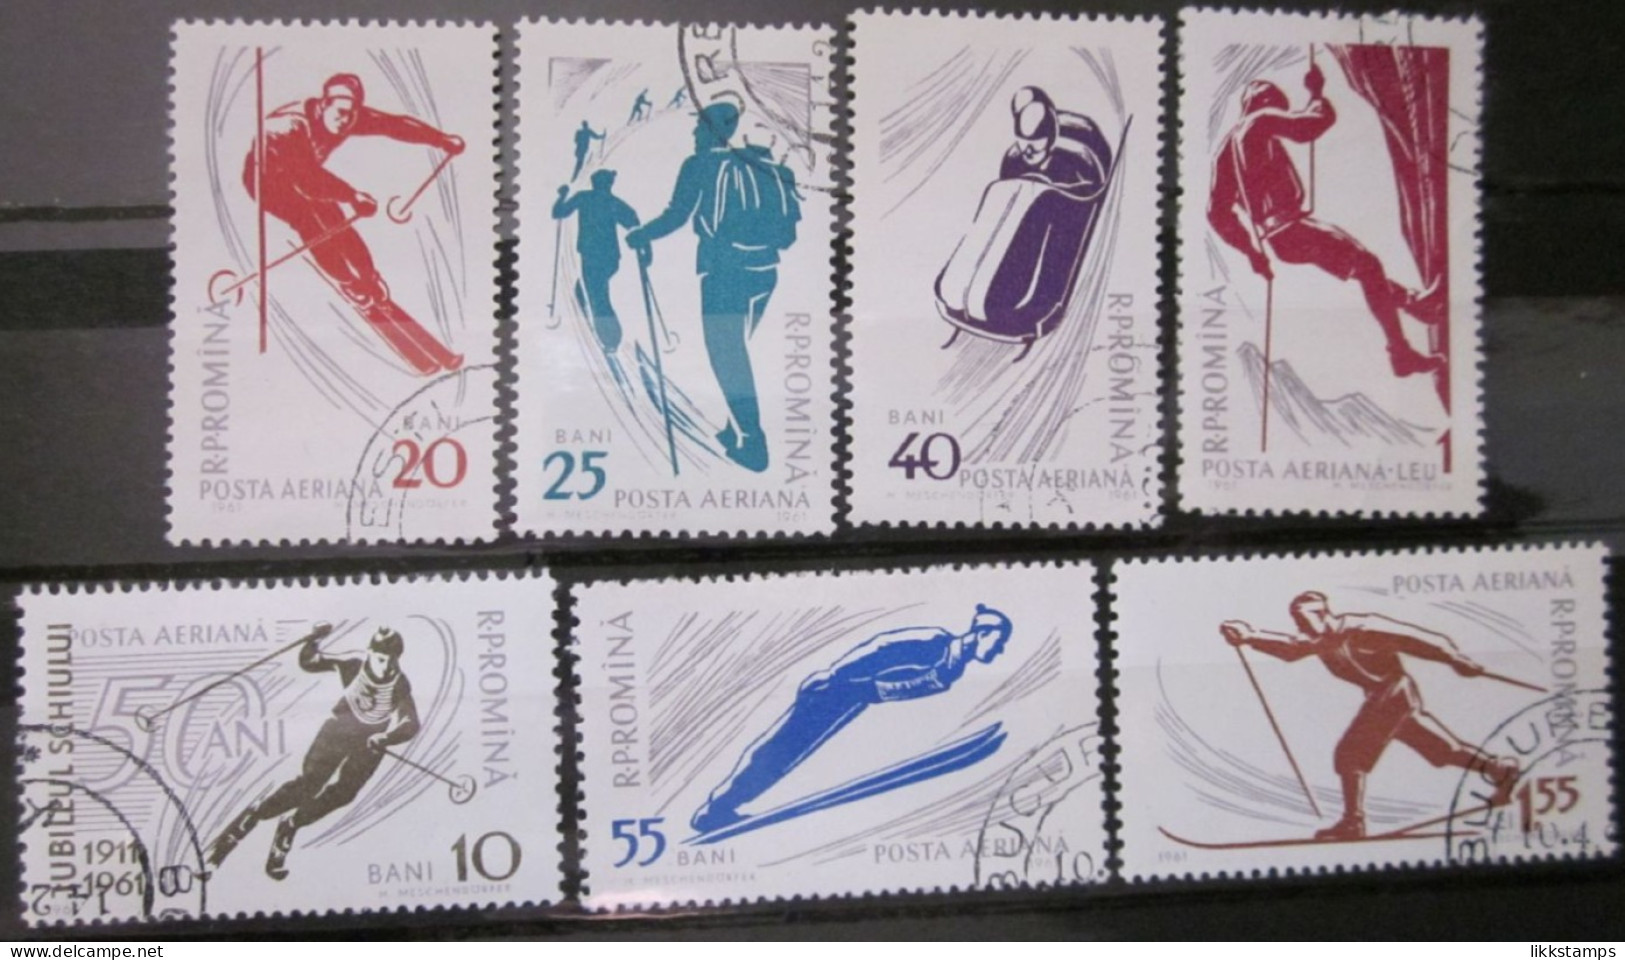 ROMANIA ~ 1961 ~ S.G. NUMBERS 2820 - 2825 ~ WINTER SPORTS ~ VFU #03546 - Used Stamps